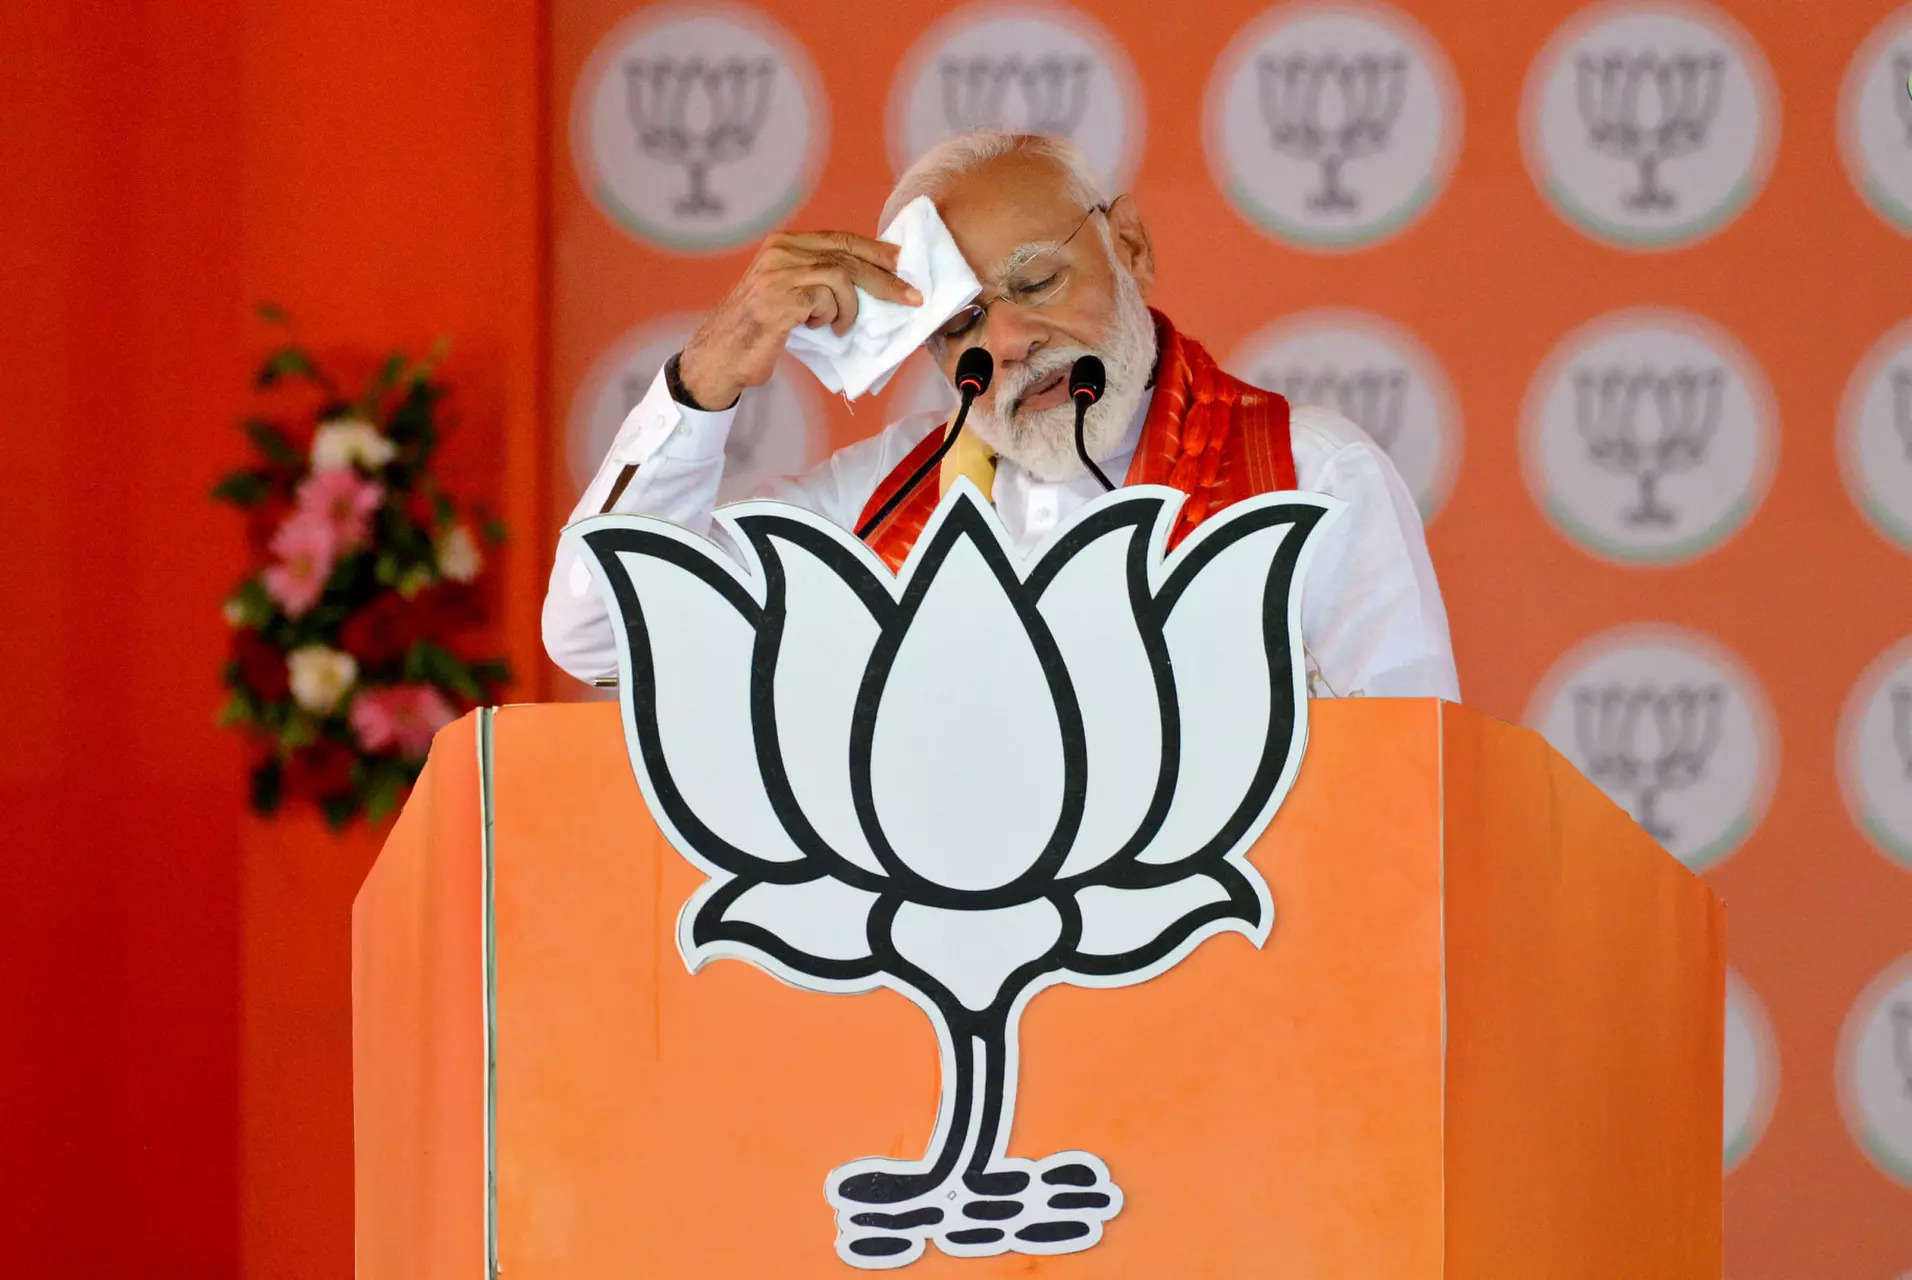 Congress anti-Hindu, does not care about country: PM Modi in Telangana rally 